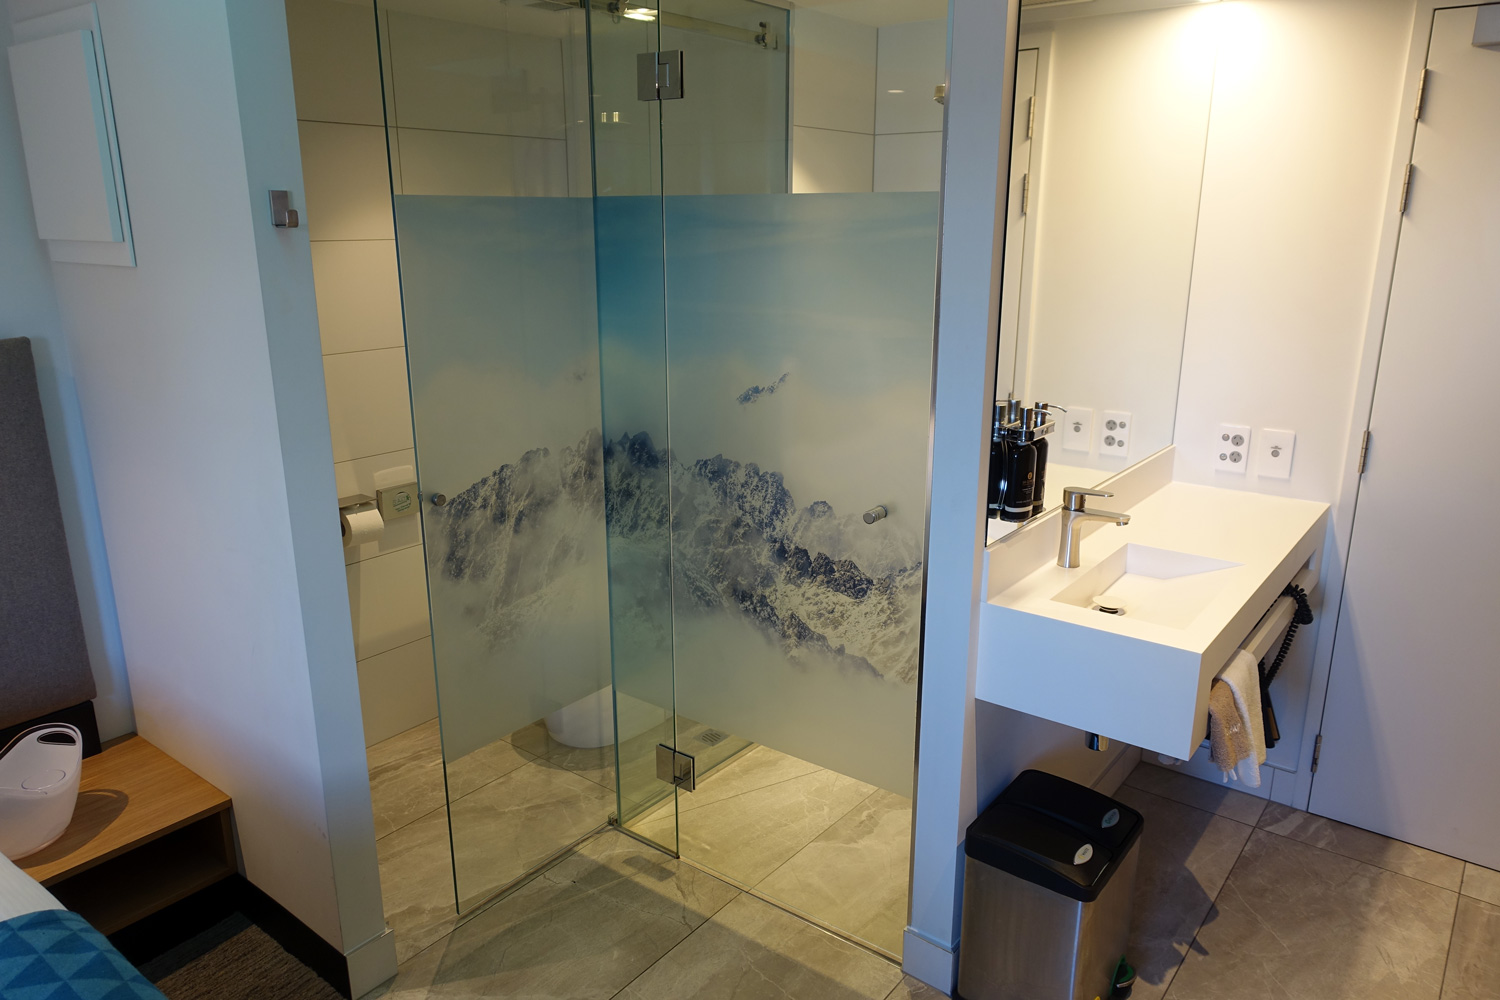 Funky bathroom: loved the frosted glass mountains